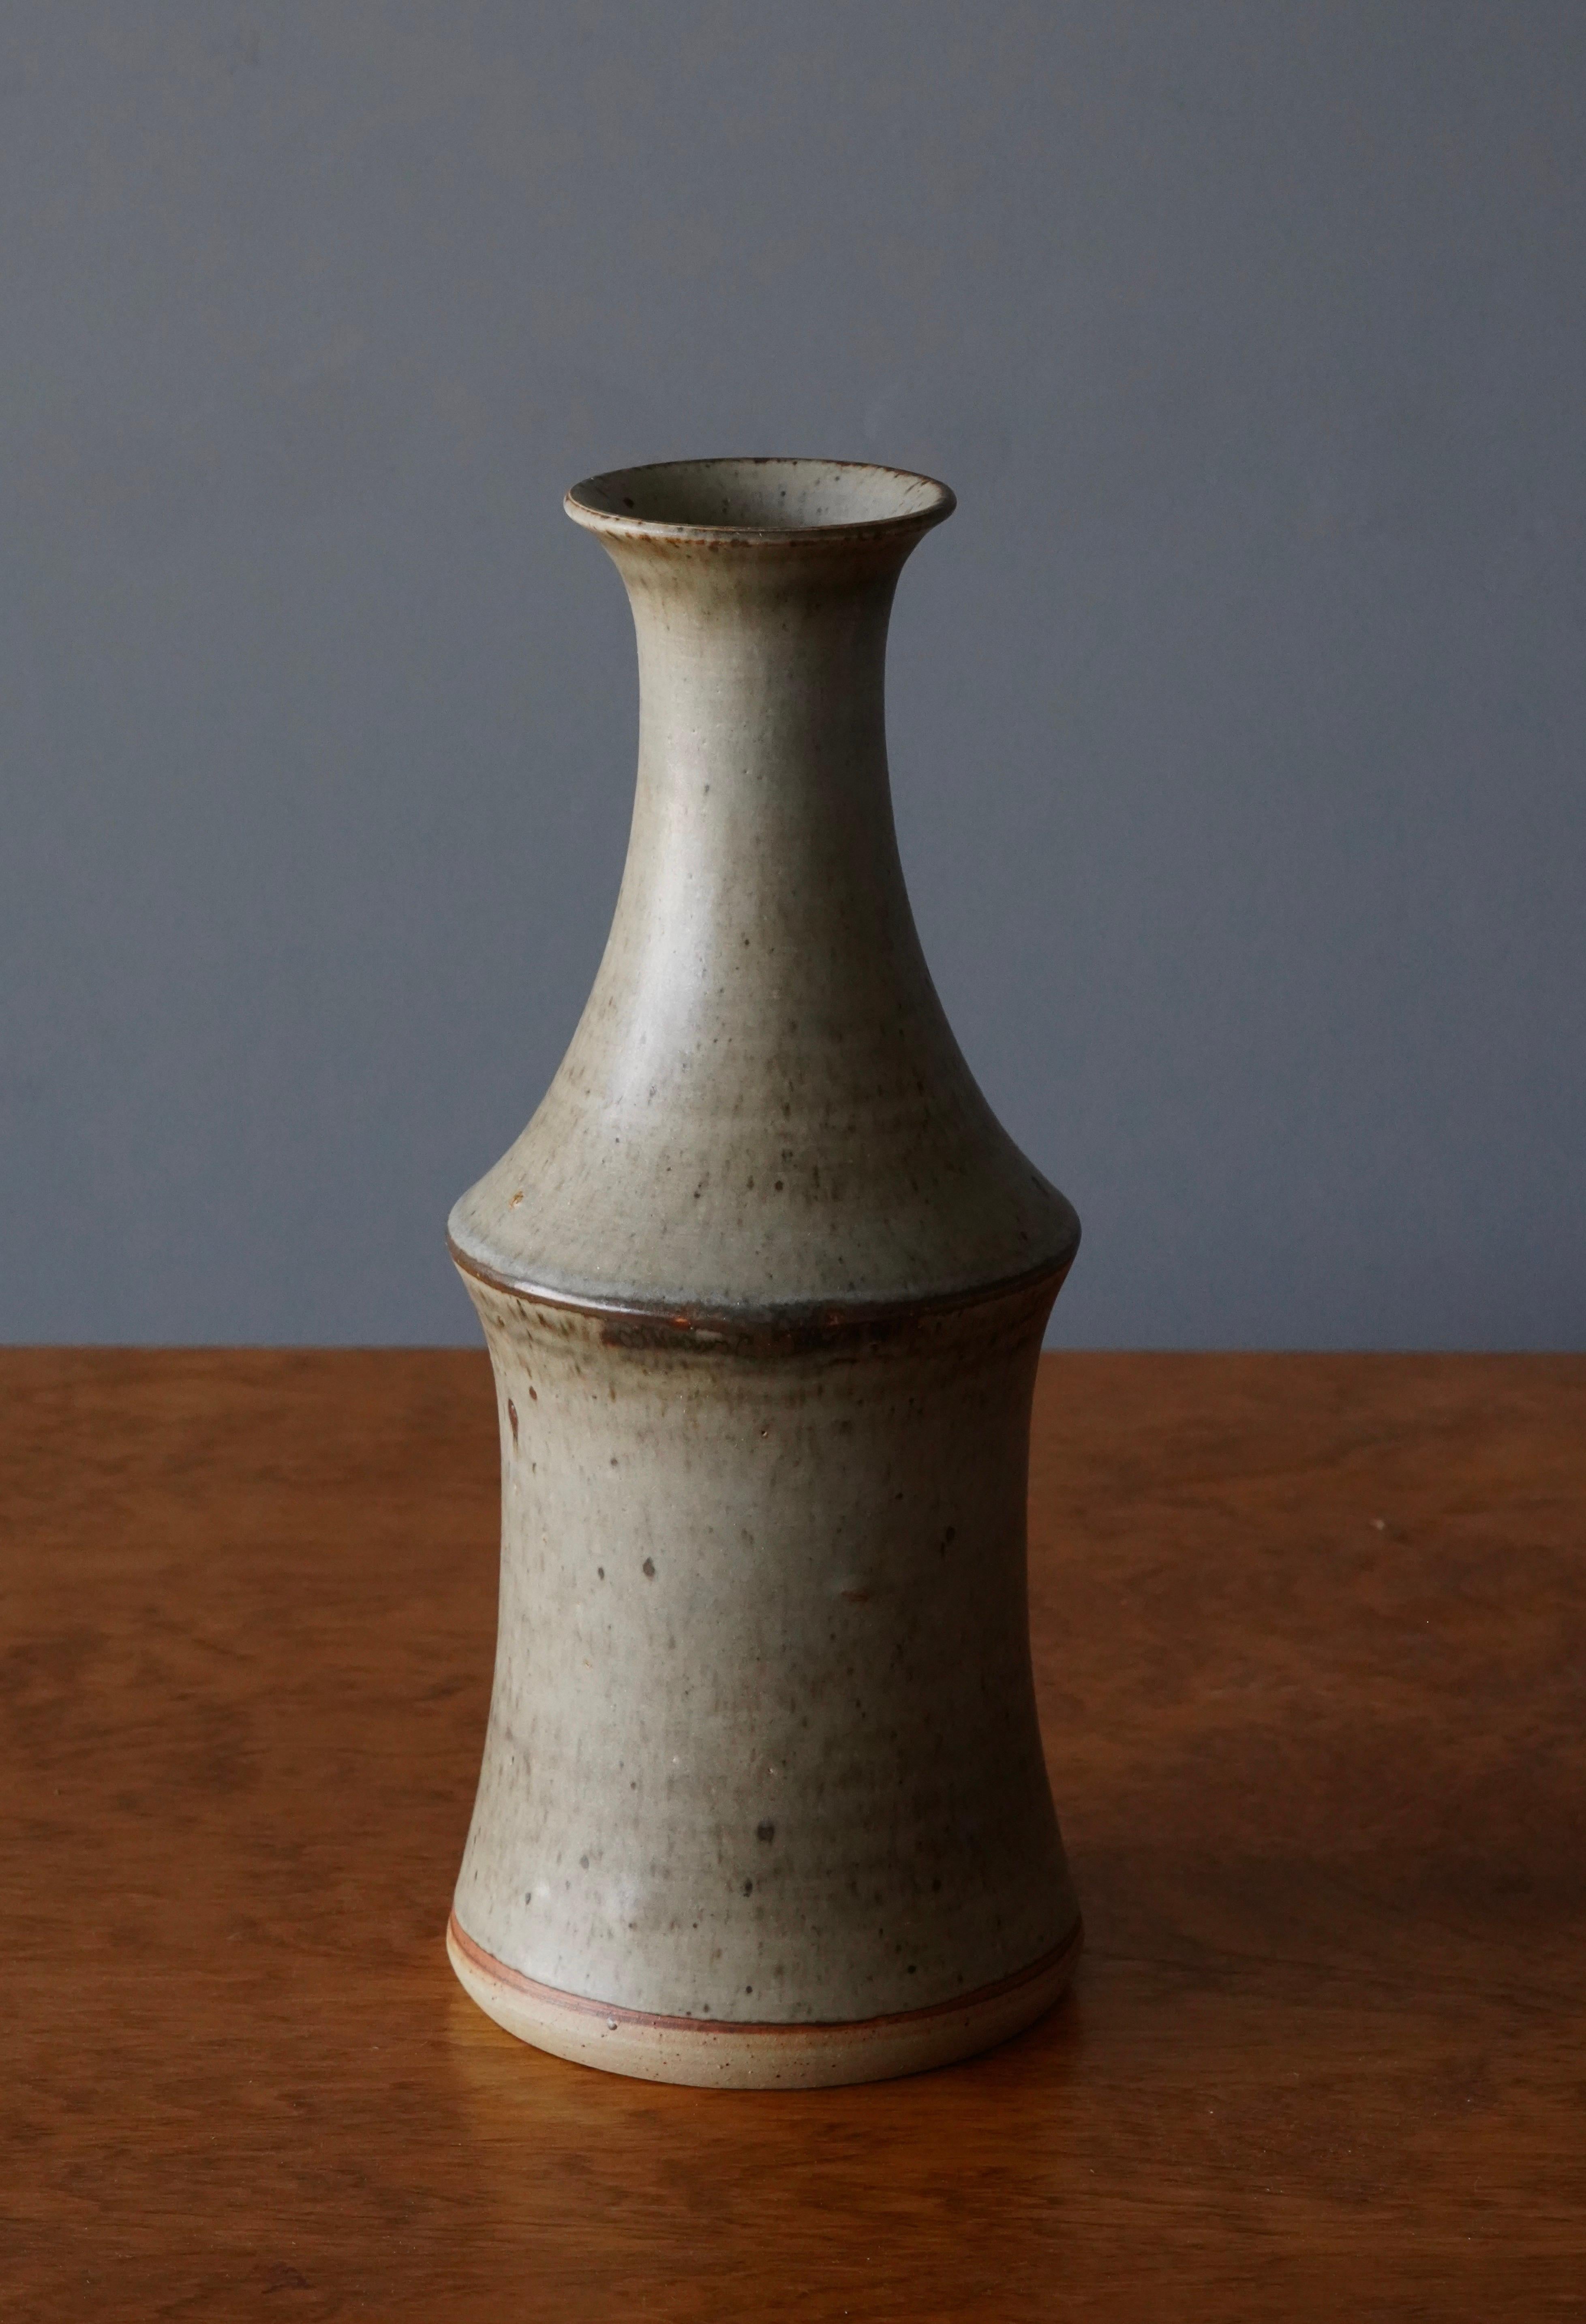 A vase, designed by John Andersson, for Höganäs Keramik, Sweden, c. 1950s-1960s. 

Features glazed stoneware. Artistic glaze in grey with tones of brown and green.